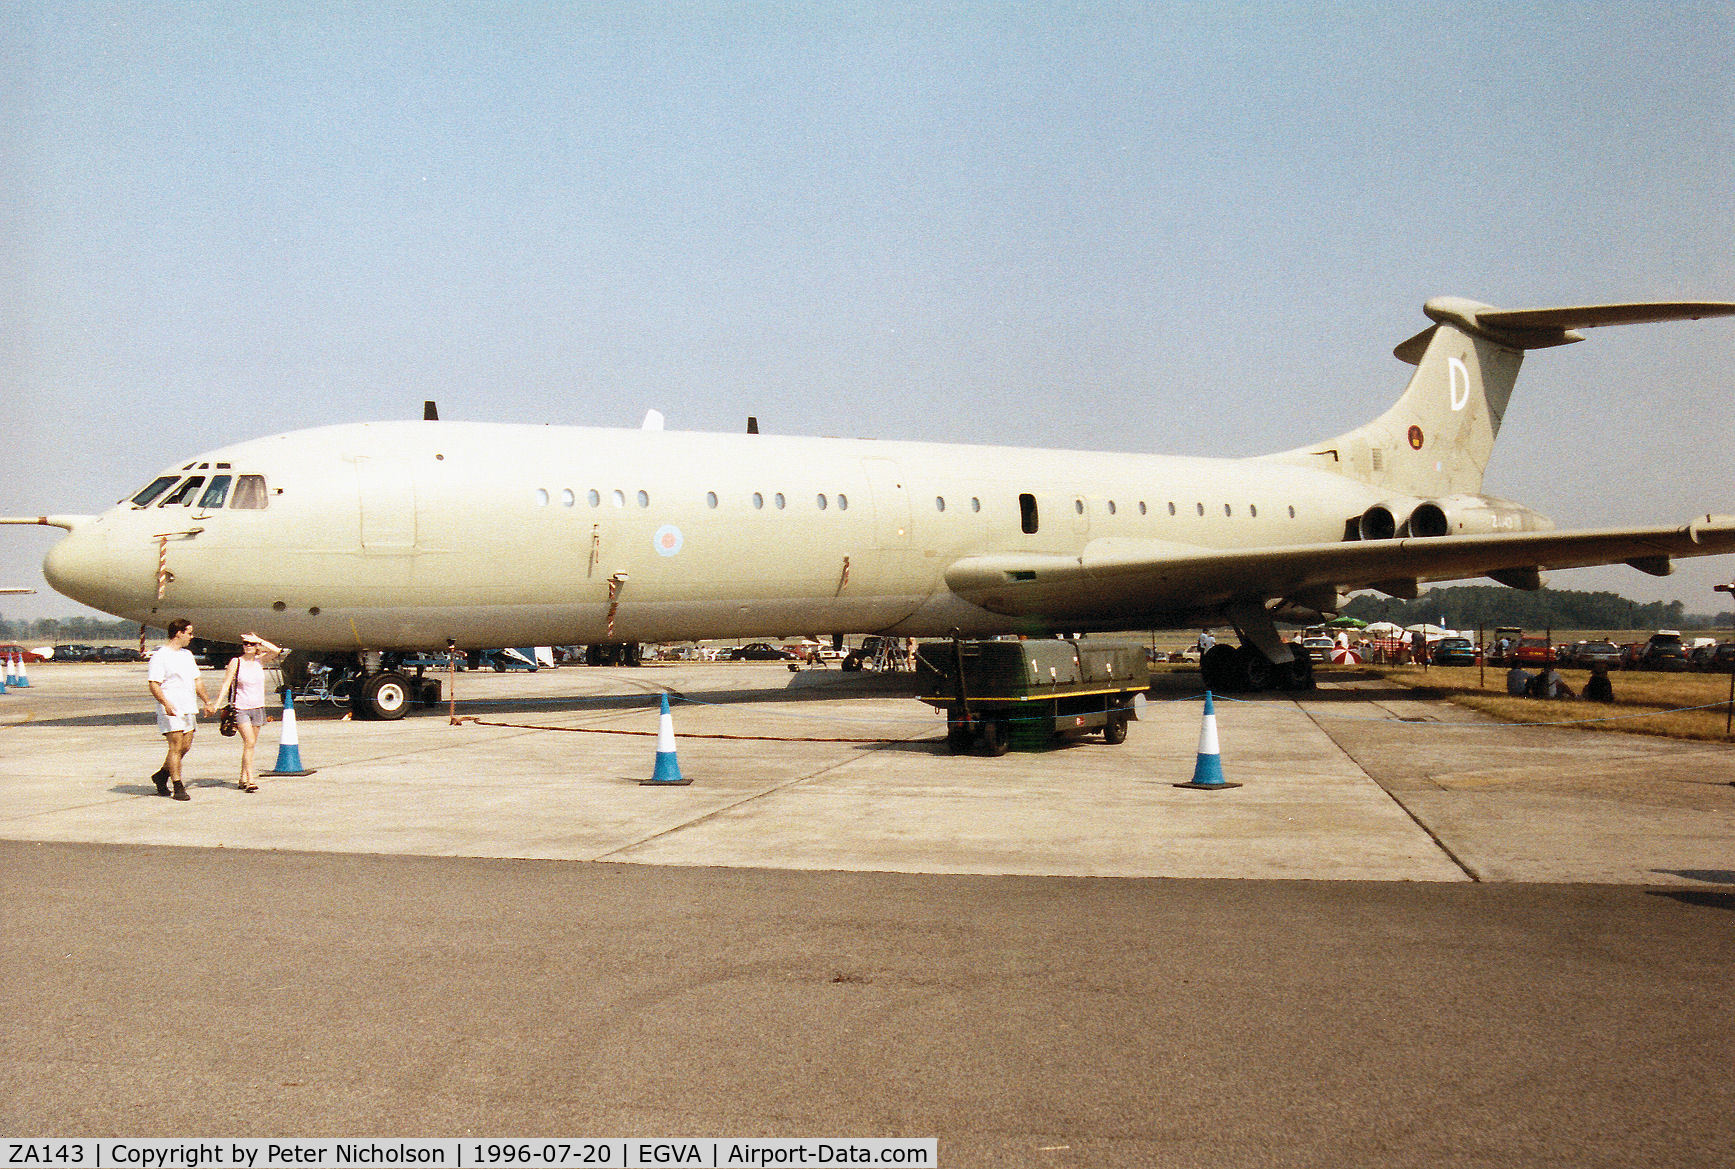 ZA143, Vickers VC10 K.2 C/N 813, VC-10 K.2 tanker of 101 Squadron at RAF Brize Norton on display at the 1996 Royal Intnl Air Tattoo at RAF Fairford.